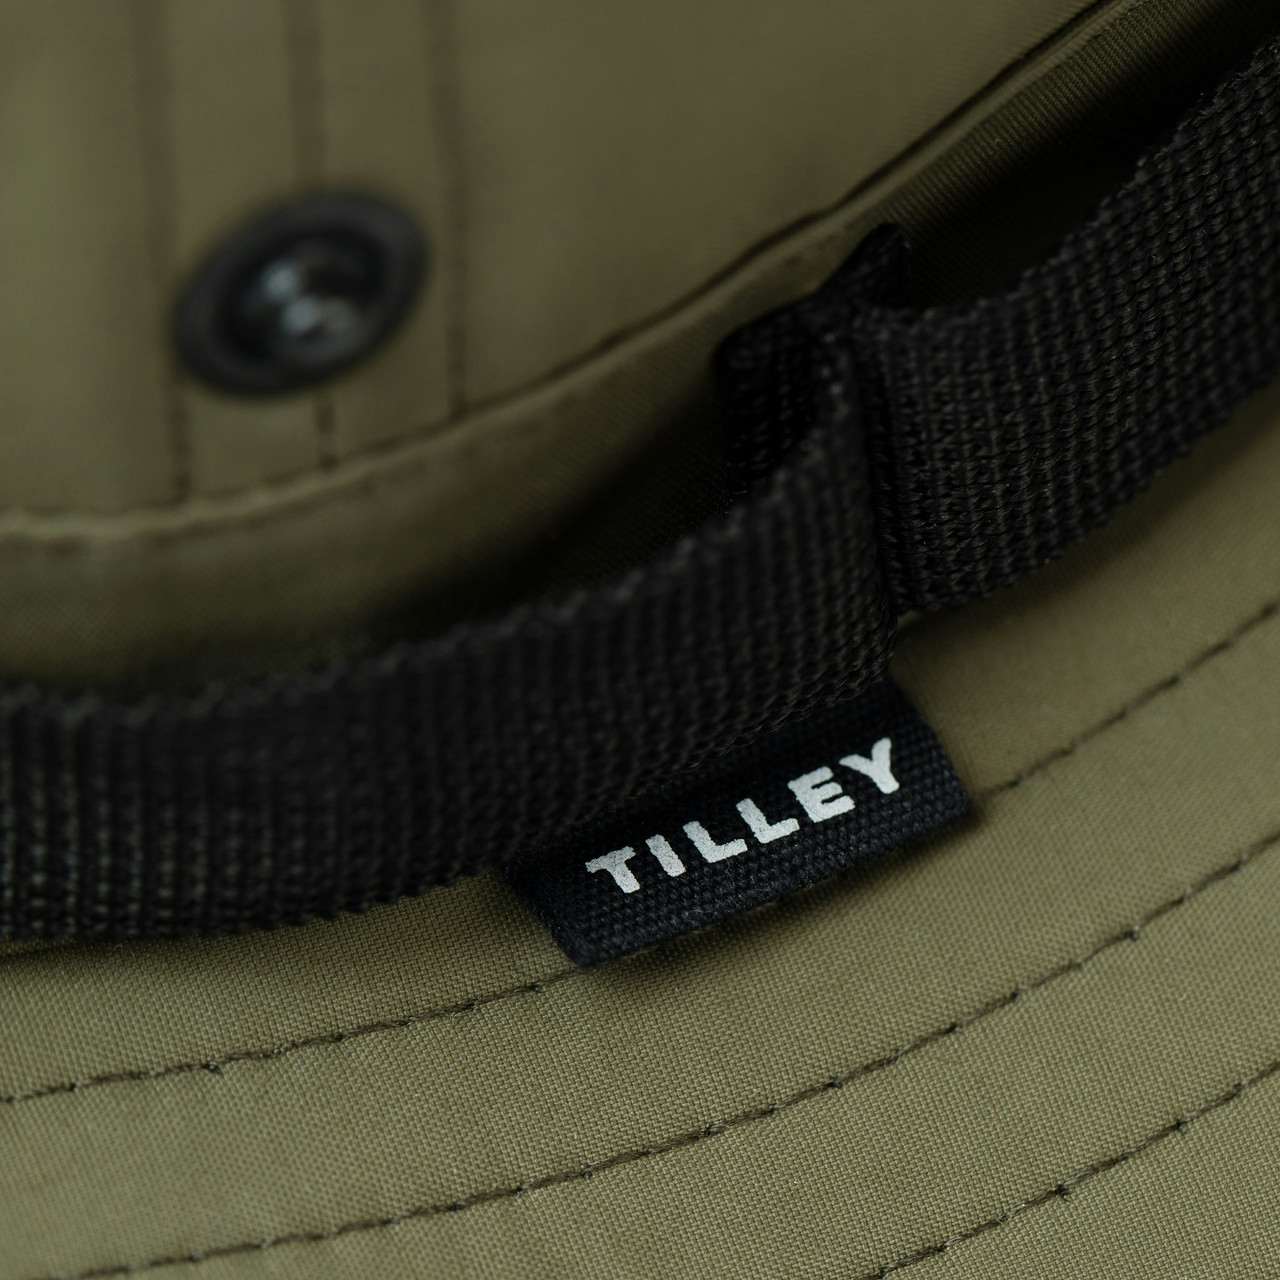 Recycled Utility Hat Olive